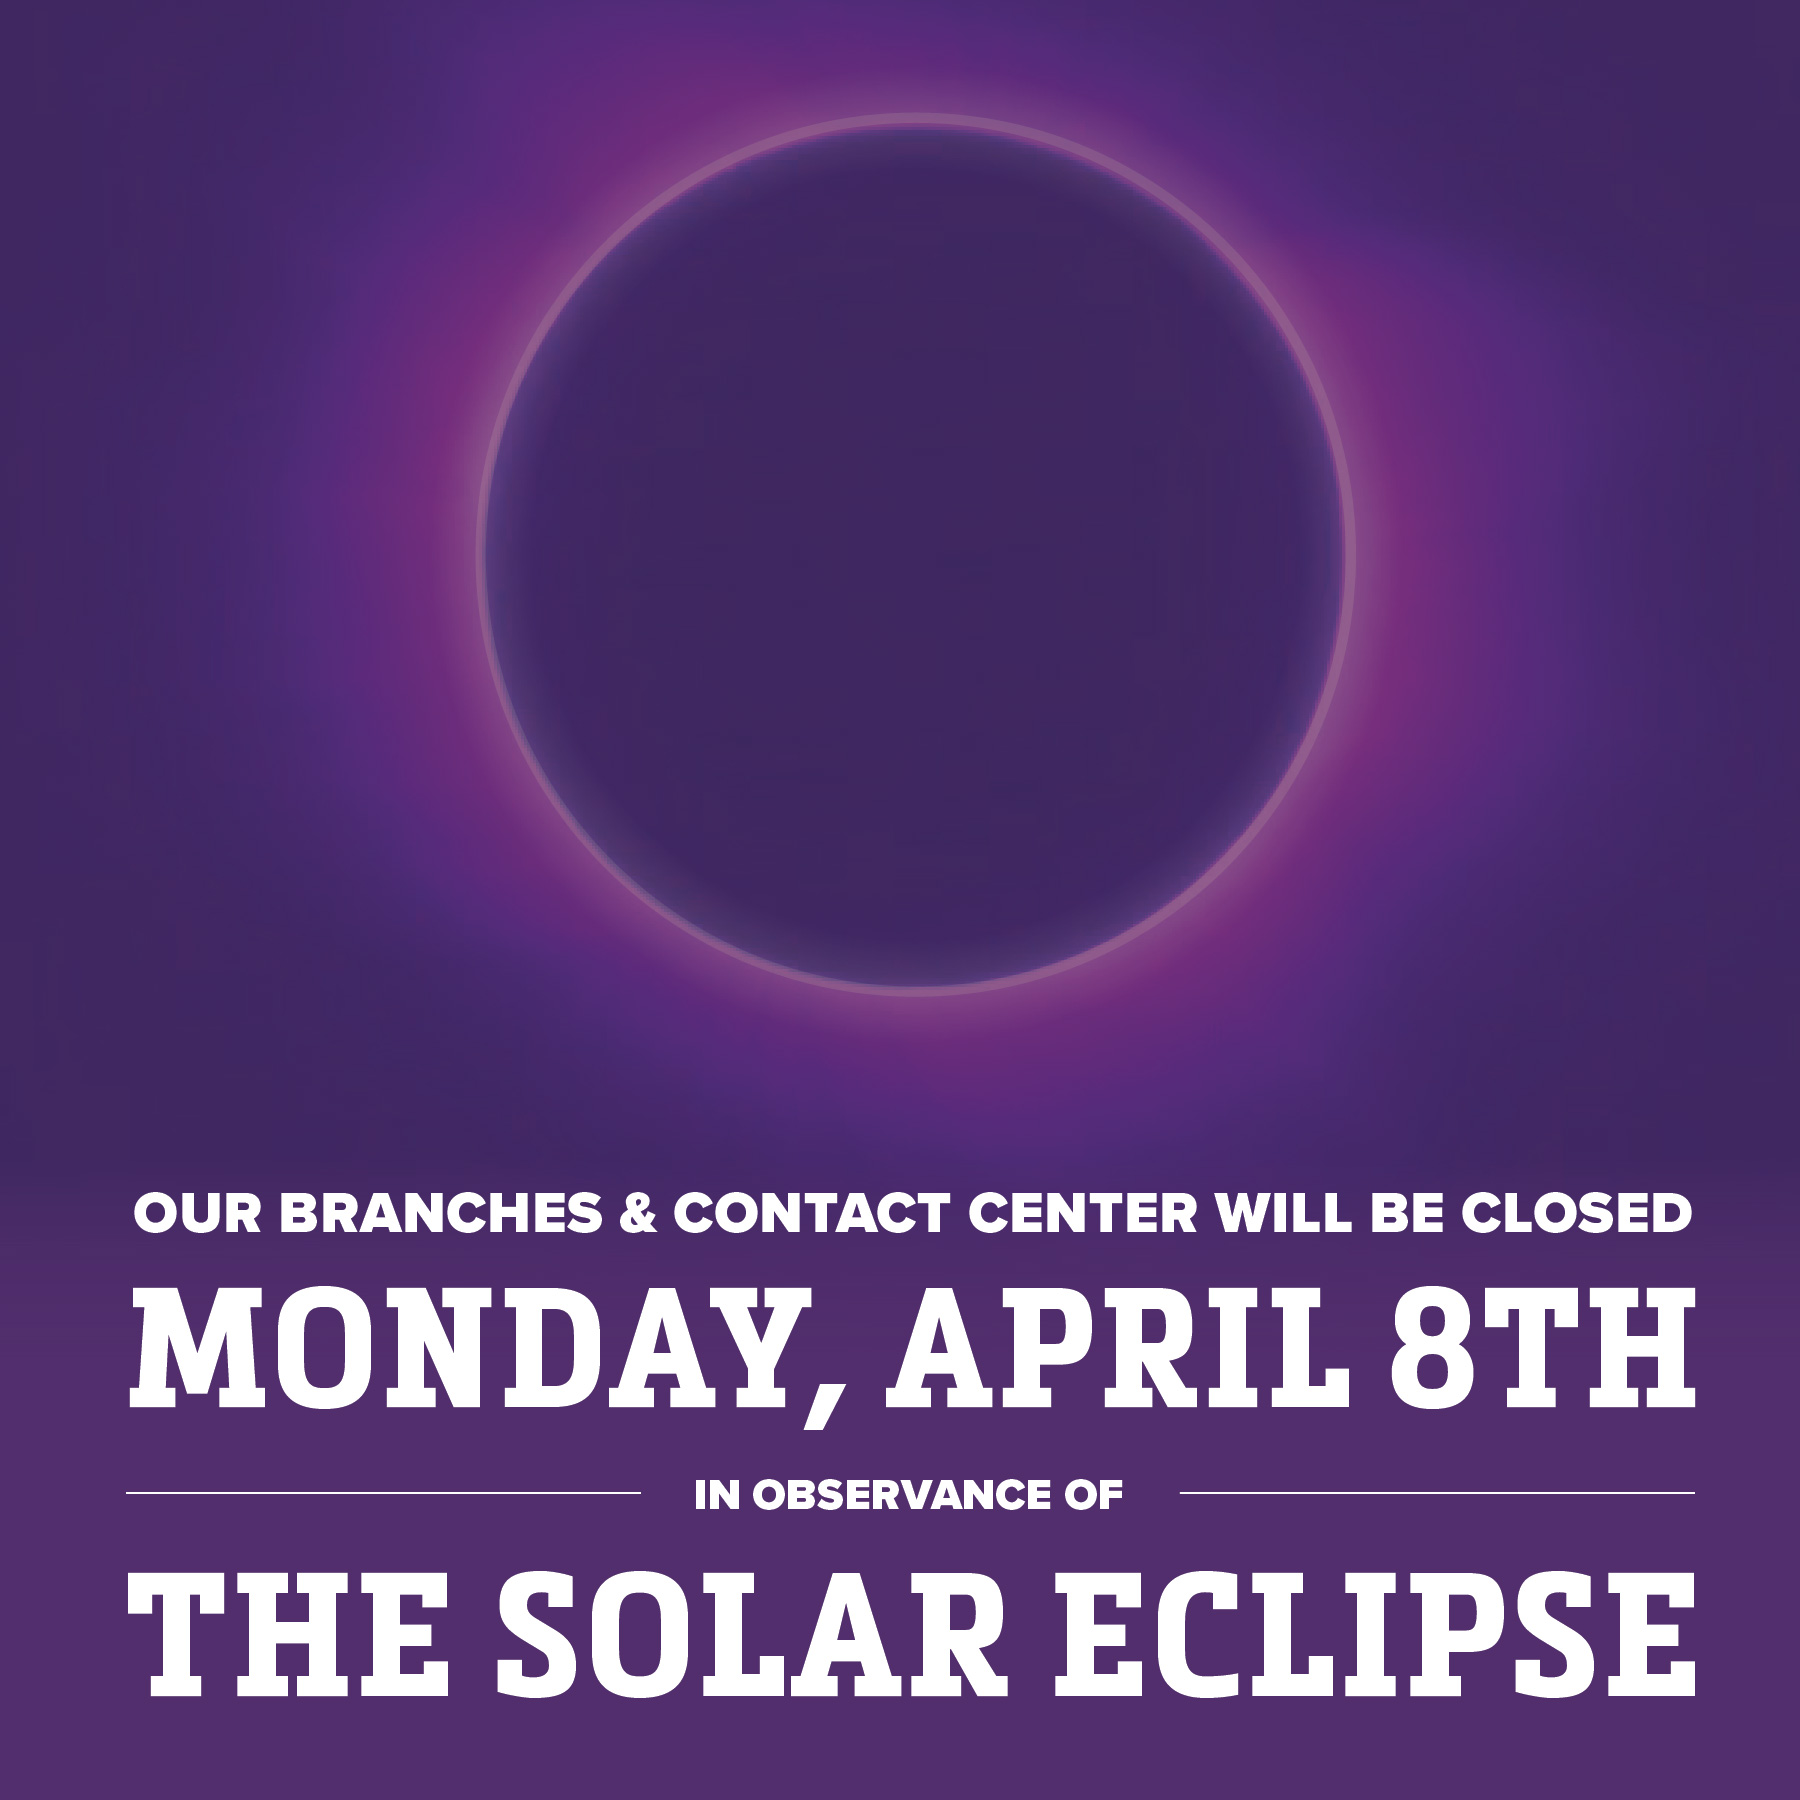 All Branches Closed on Monday, April 8th For The Solar Eclipse